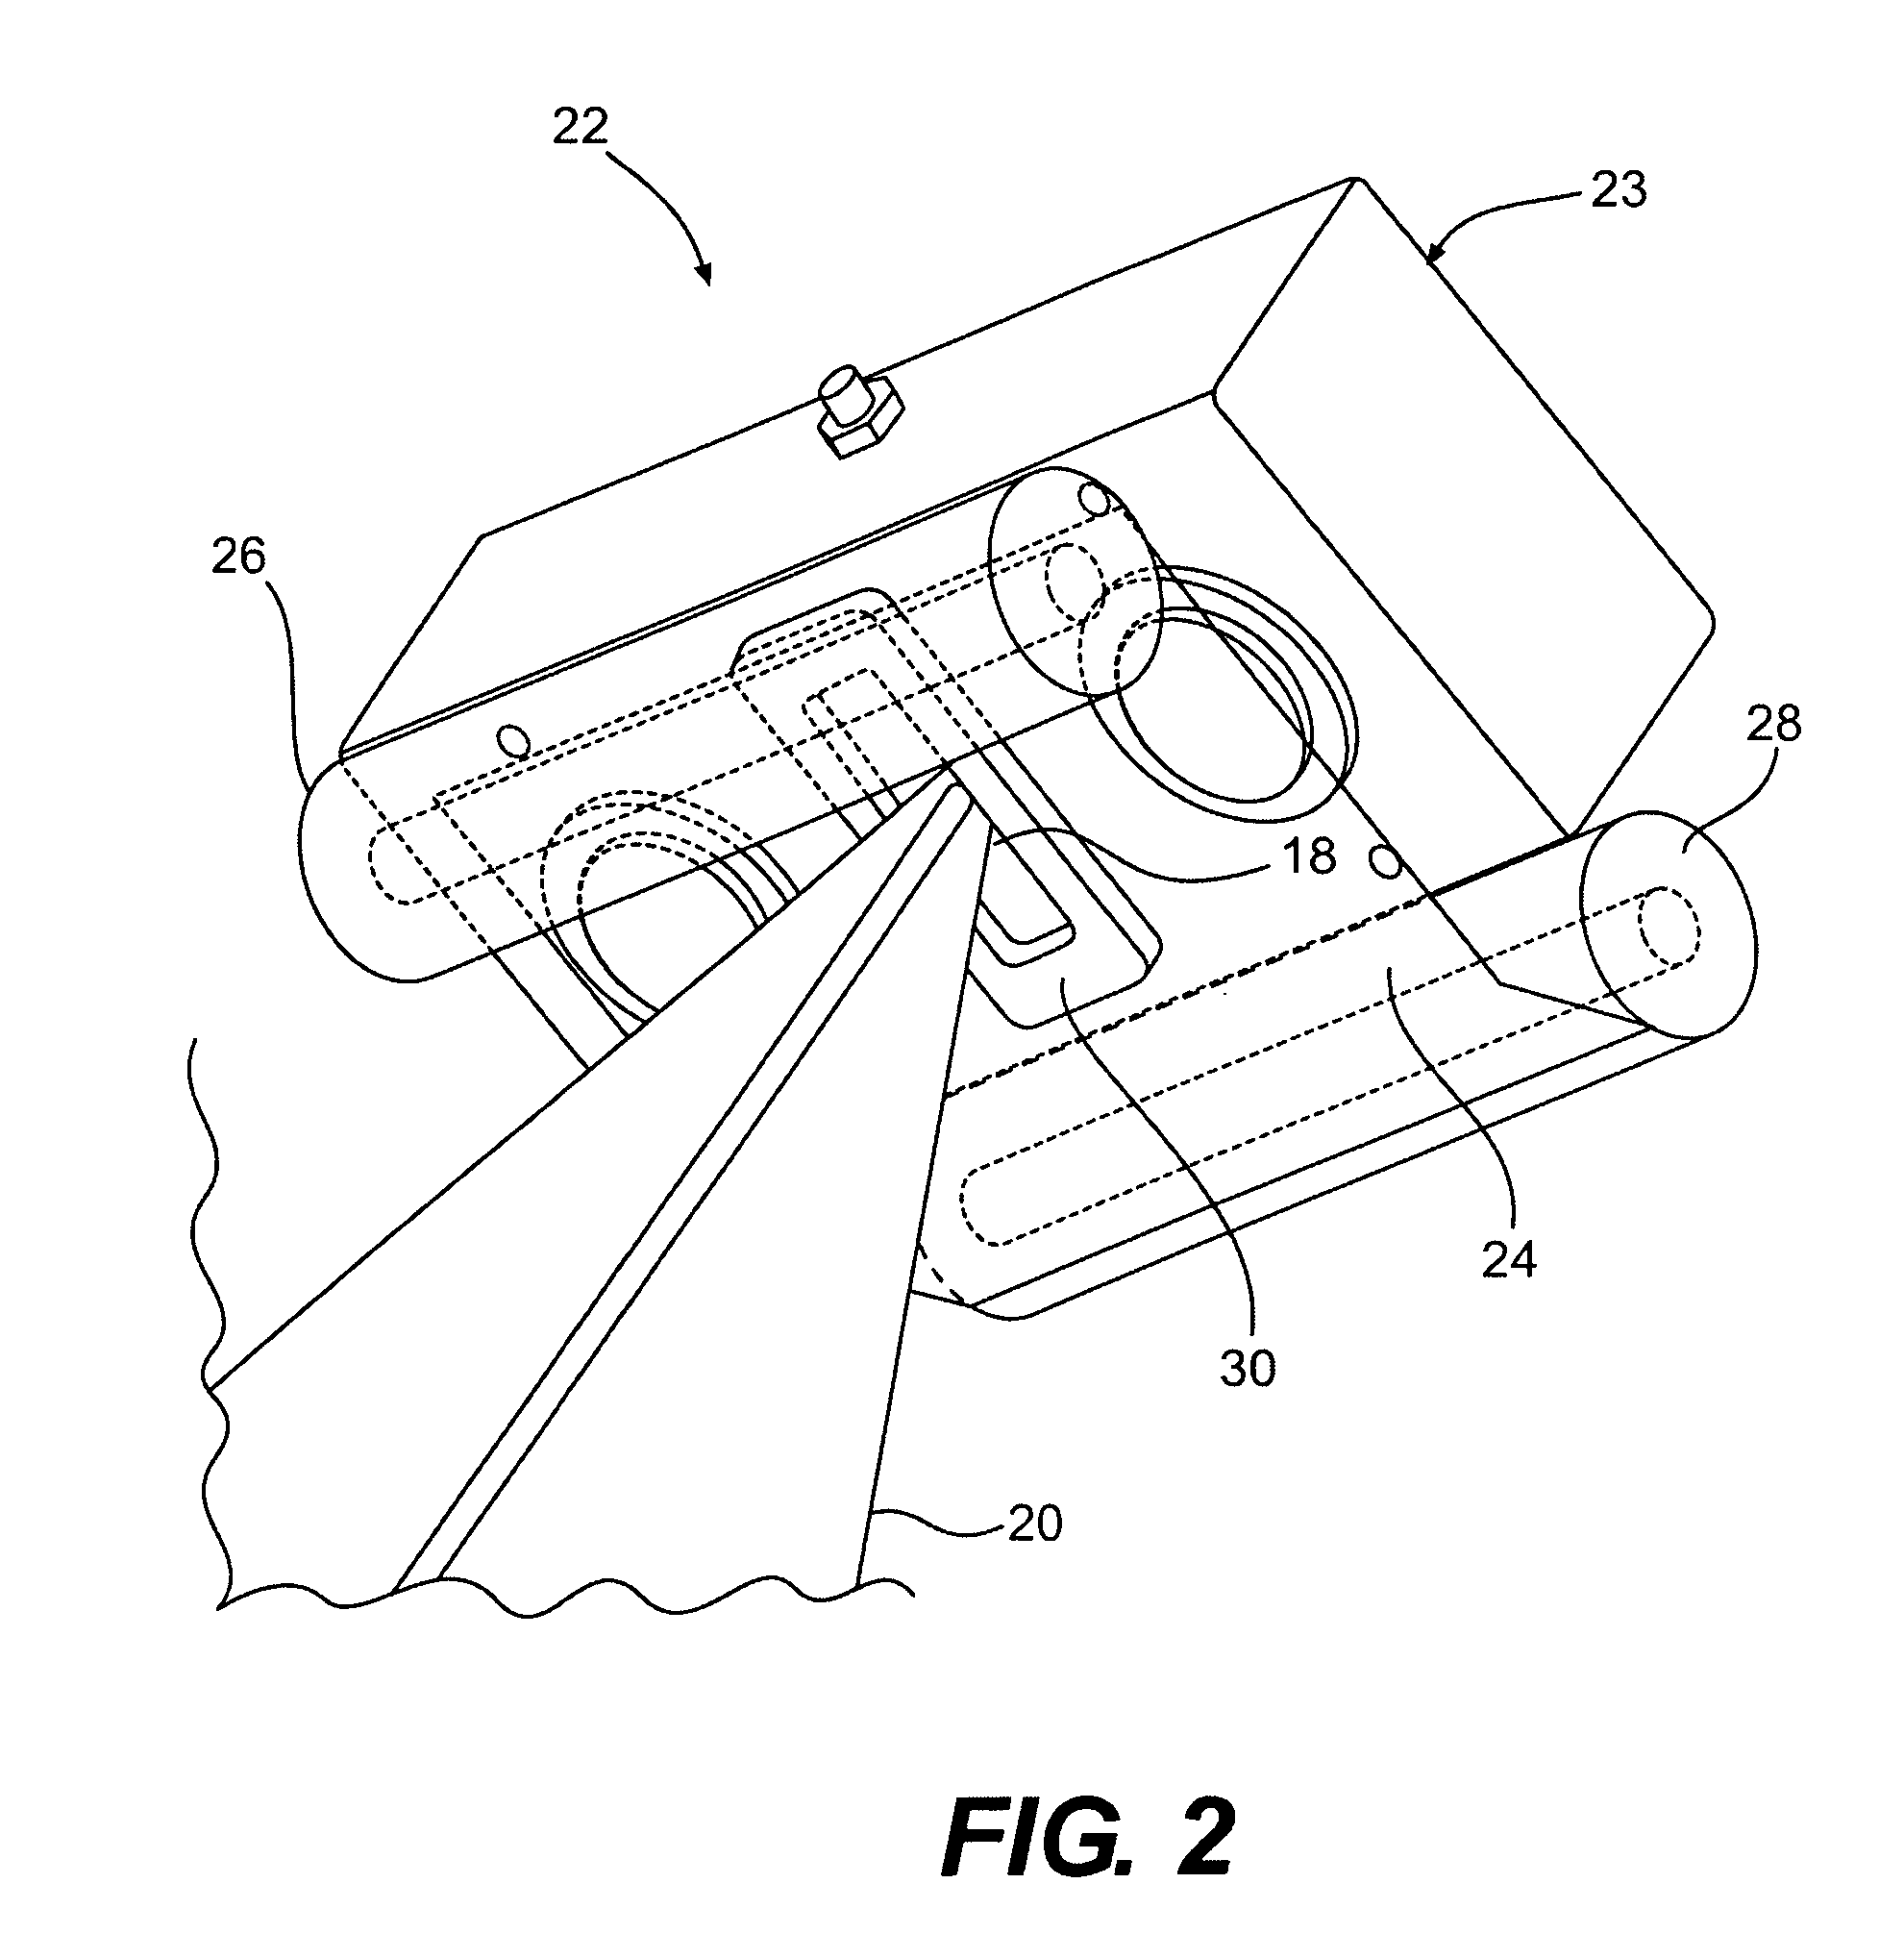 Optical path protection device and method for a railroad track inspection system